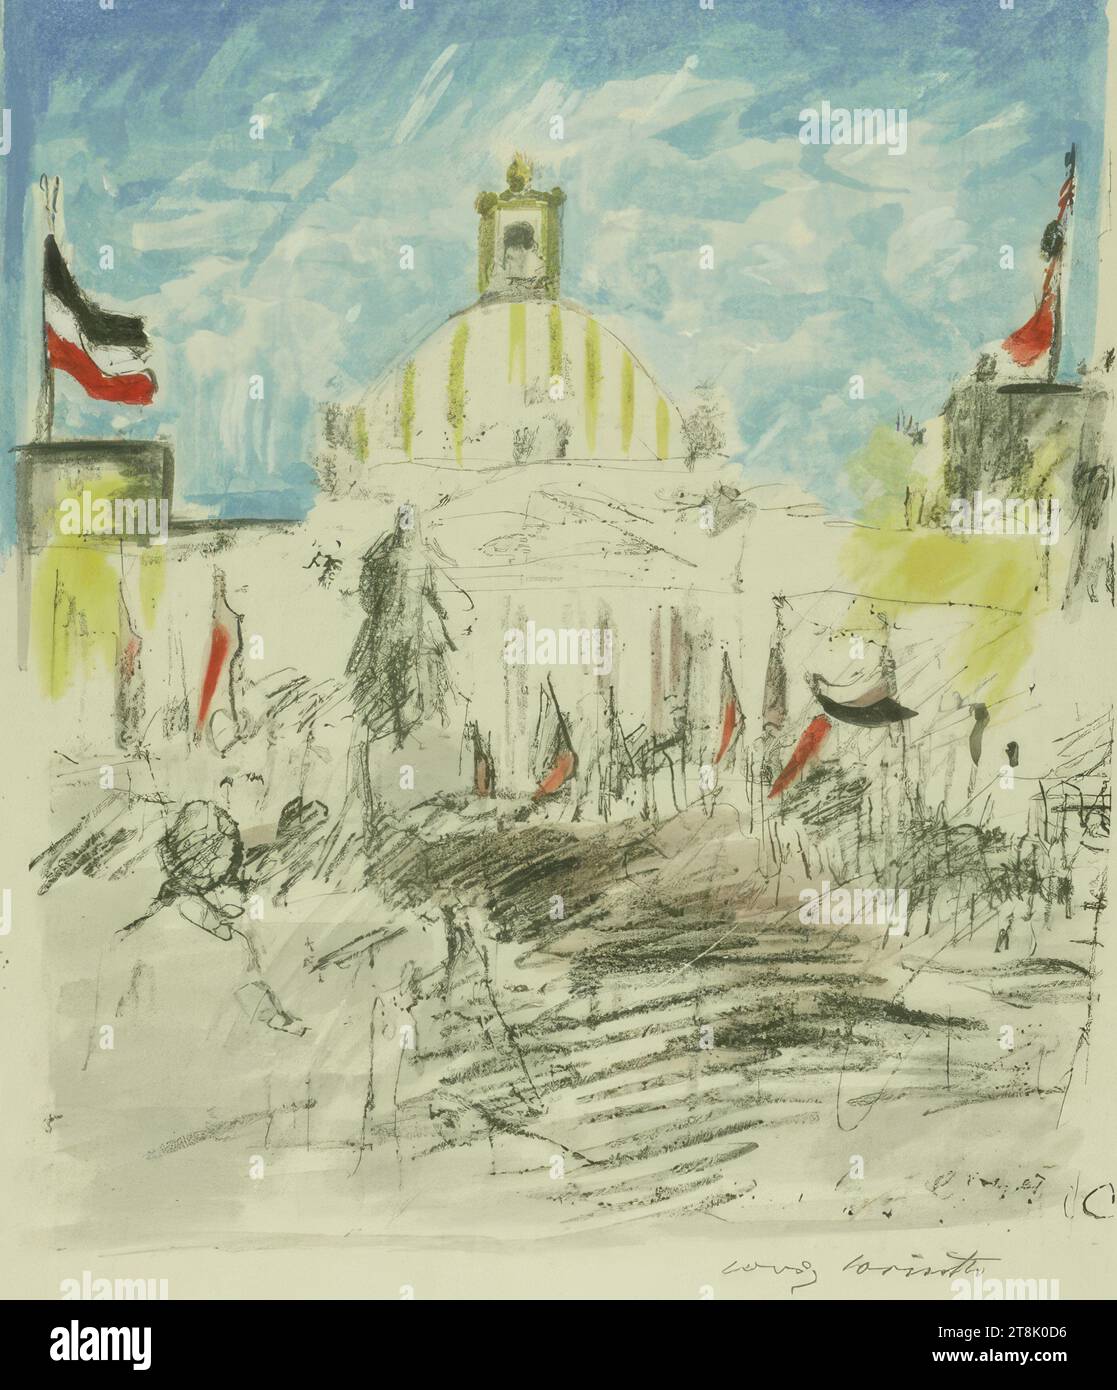 Gathering in a city square, from: 'War and Art. Original stone drawings of the Berlin Secession' folder 14, Lovis Corinth, Tapiau 1858 - 1925 Zandvoort, 1915 - 1917, prints, lithography Stock Photo